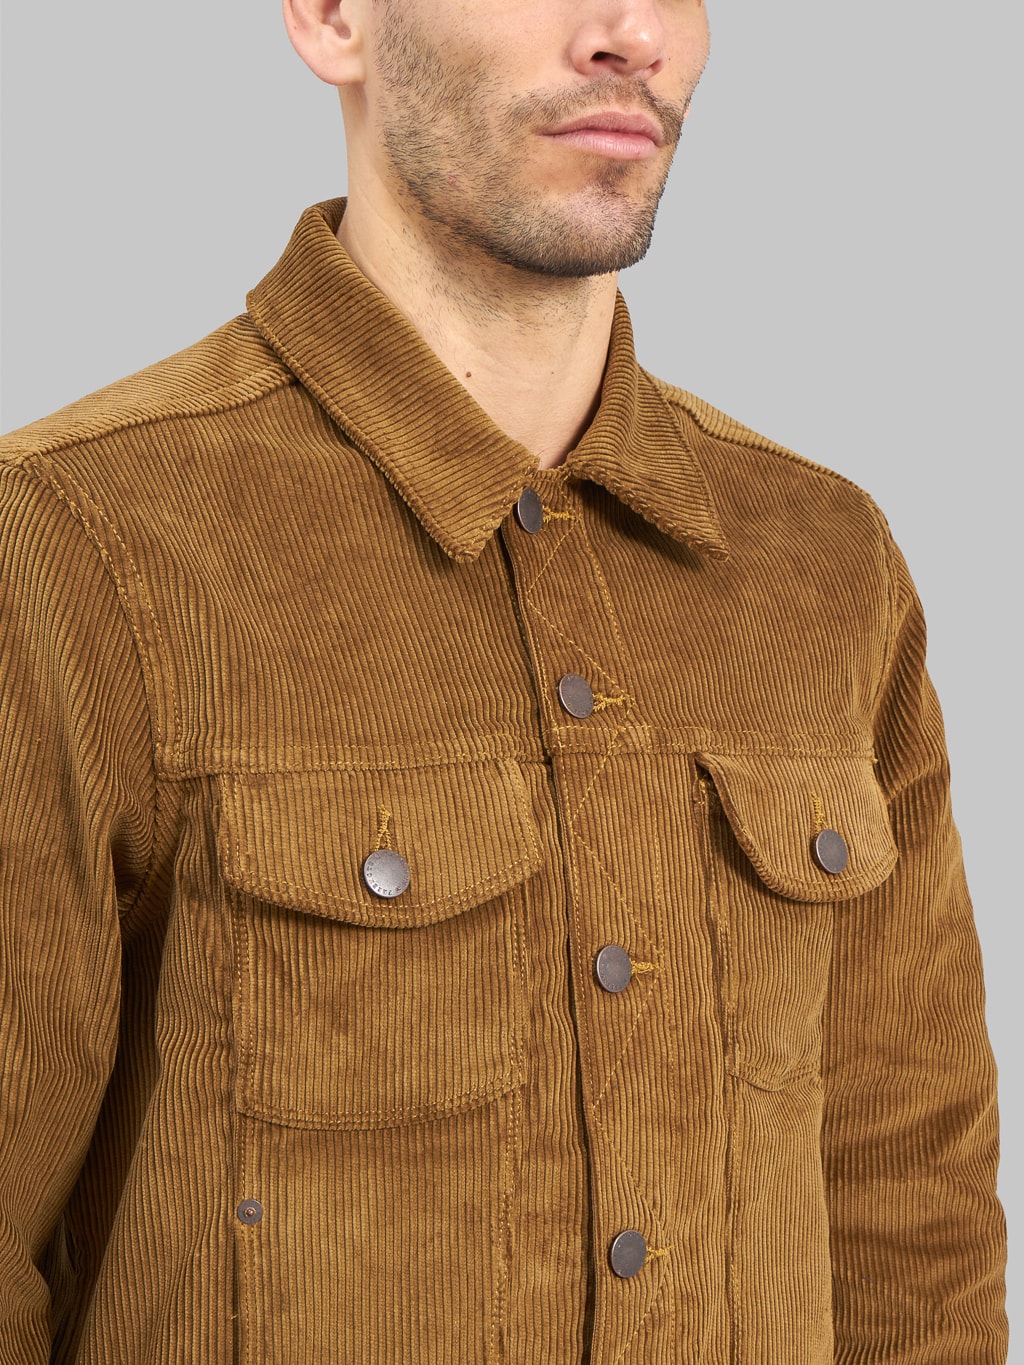 Freenote Cloth Classic Jacket Gold Corduroy  chest